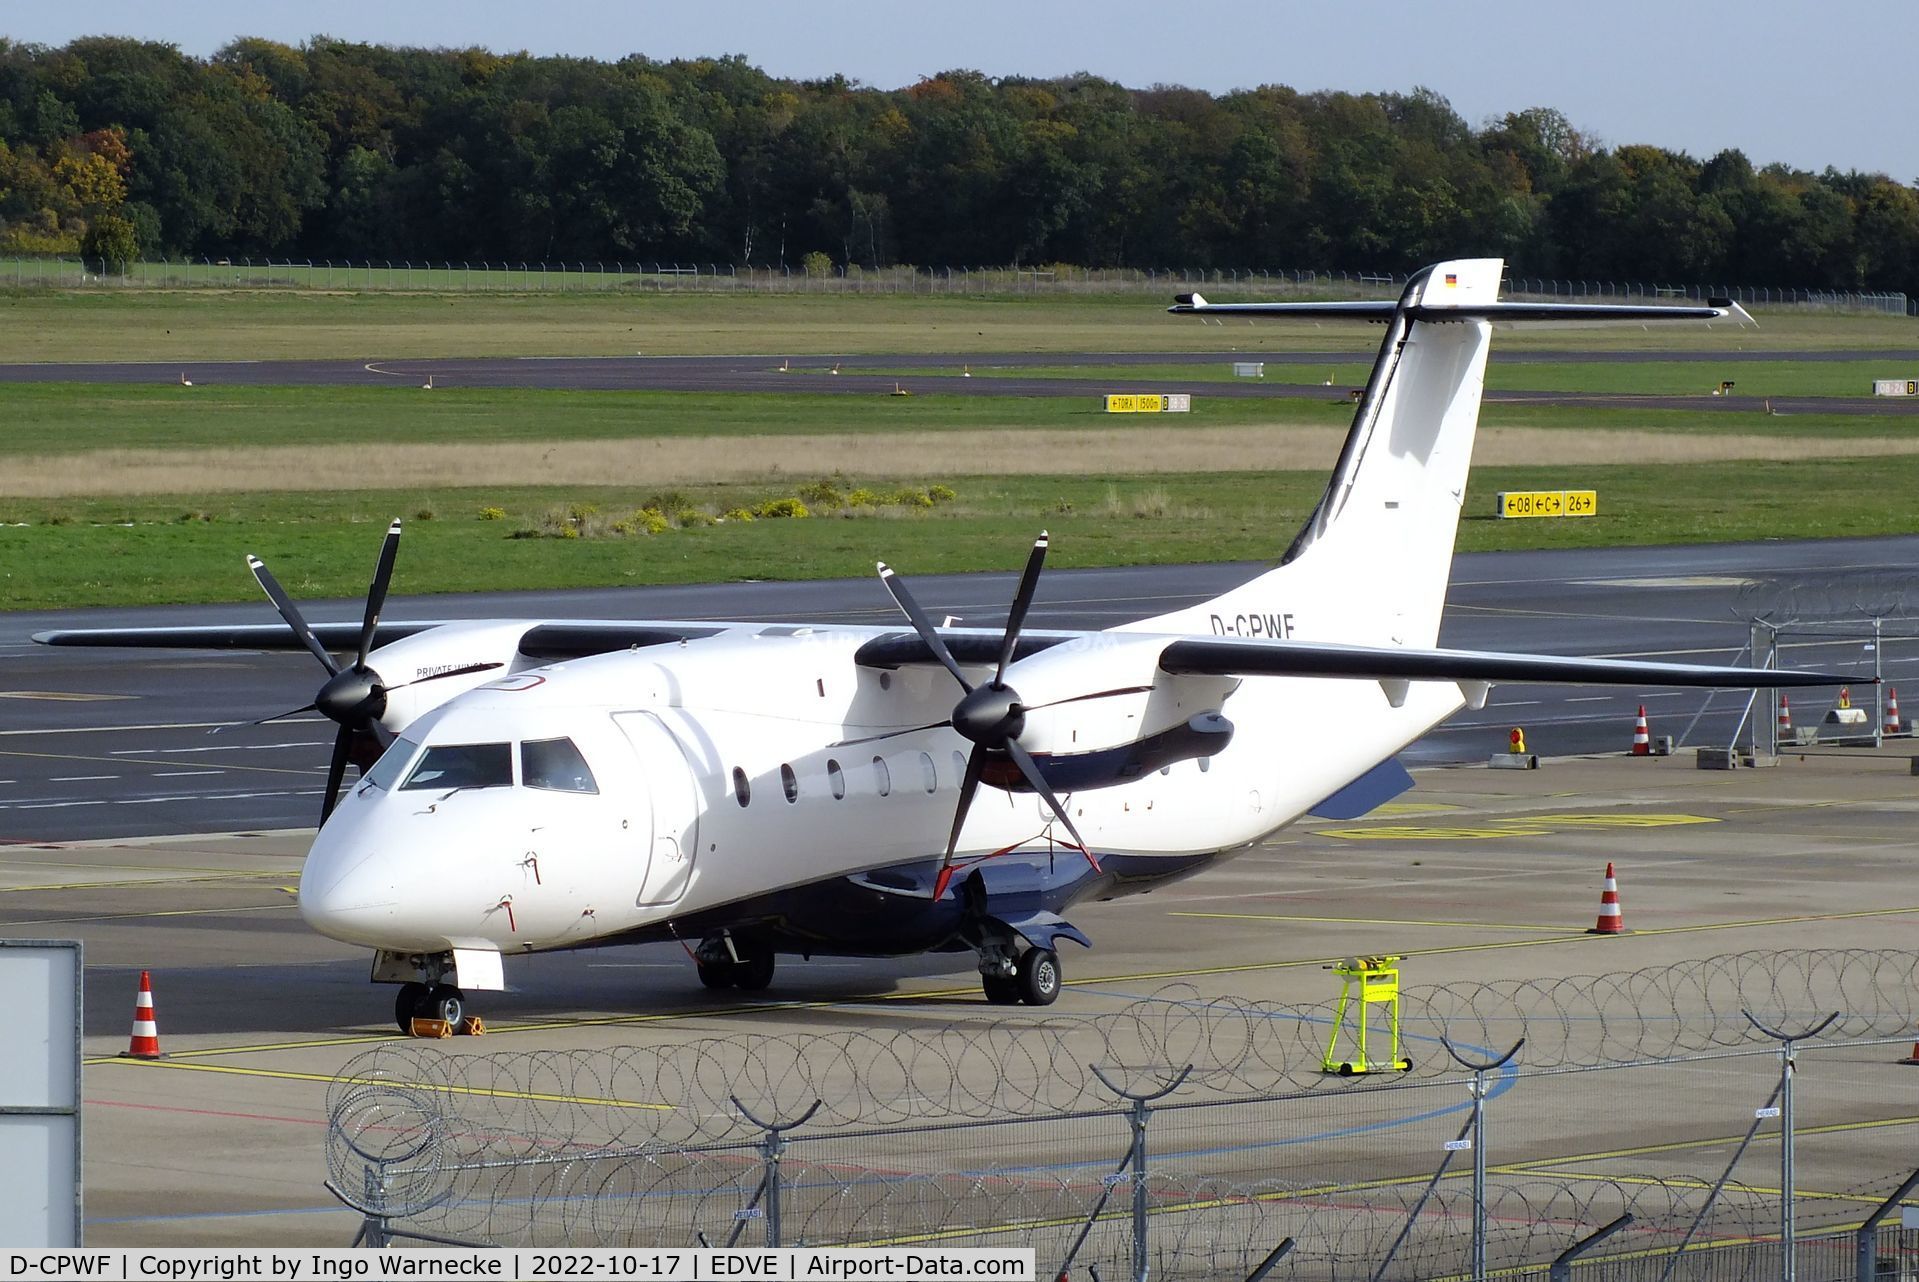 D-CPWF, 1999 Dornier 328-110 C/N 3112, Dornier 328-110 of Private Wings at Braunschweig-Wolfsburg airport, BS/Waggum